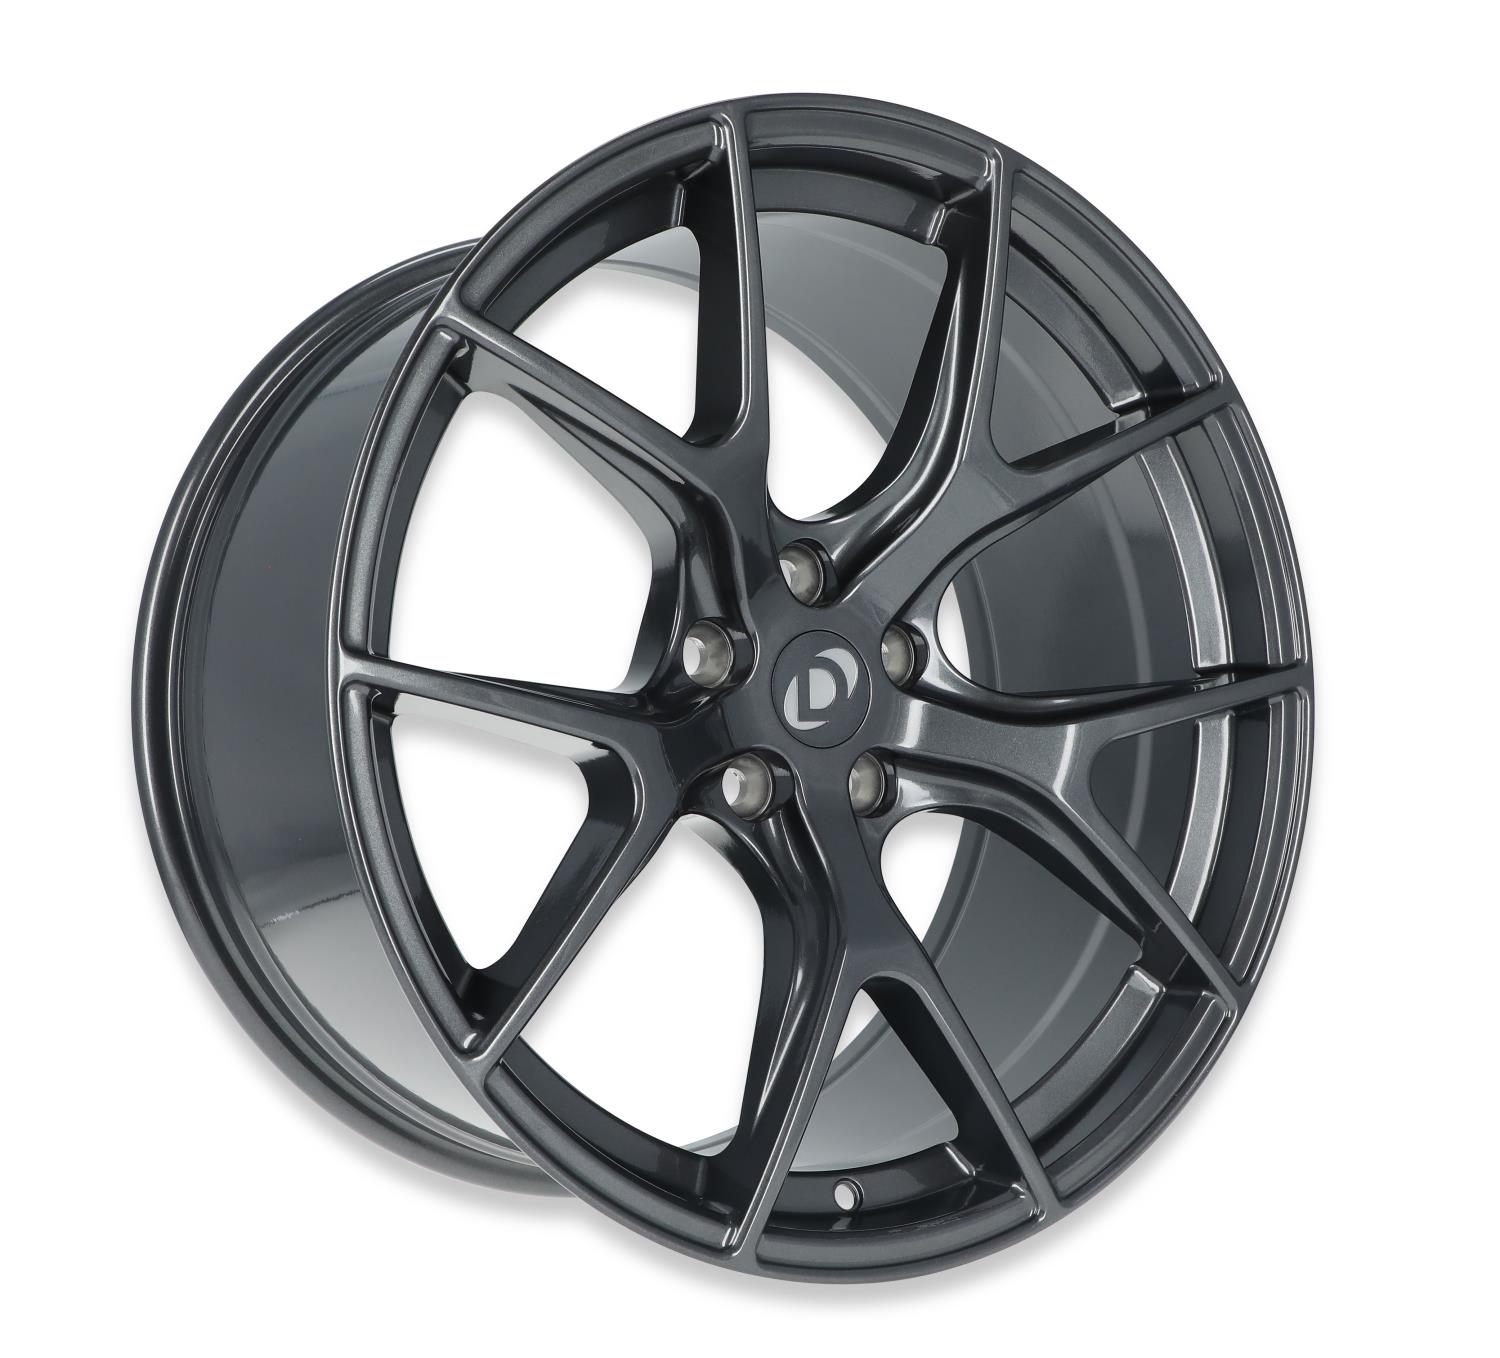 Dinan Hyper Kinetic Rear Wheel, Size: 20x8.5", Bolt Pattern: 5x120mm, Backspace: 5.54" [Anthracite Finish with Clearcoat]